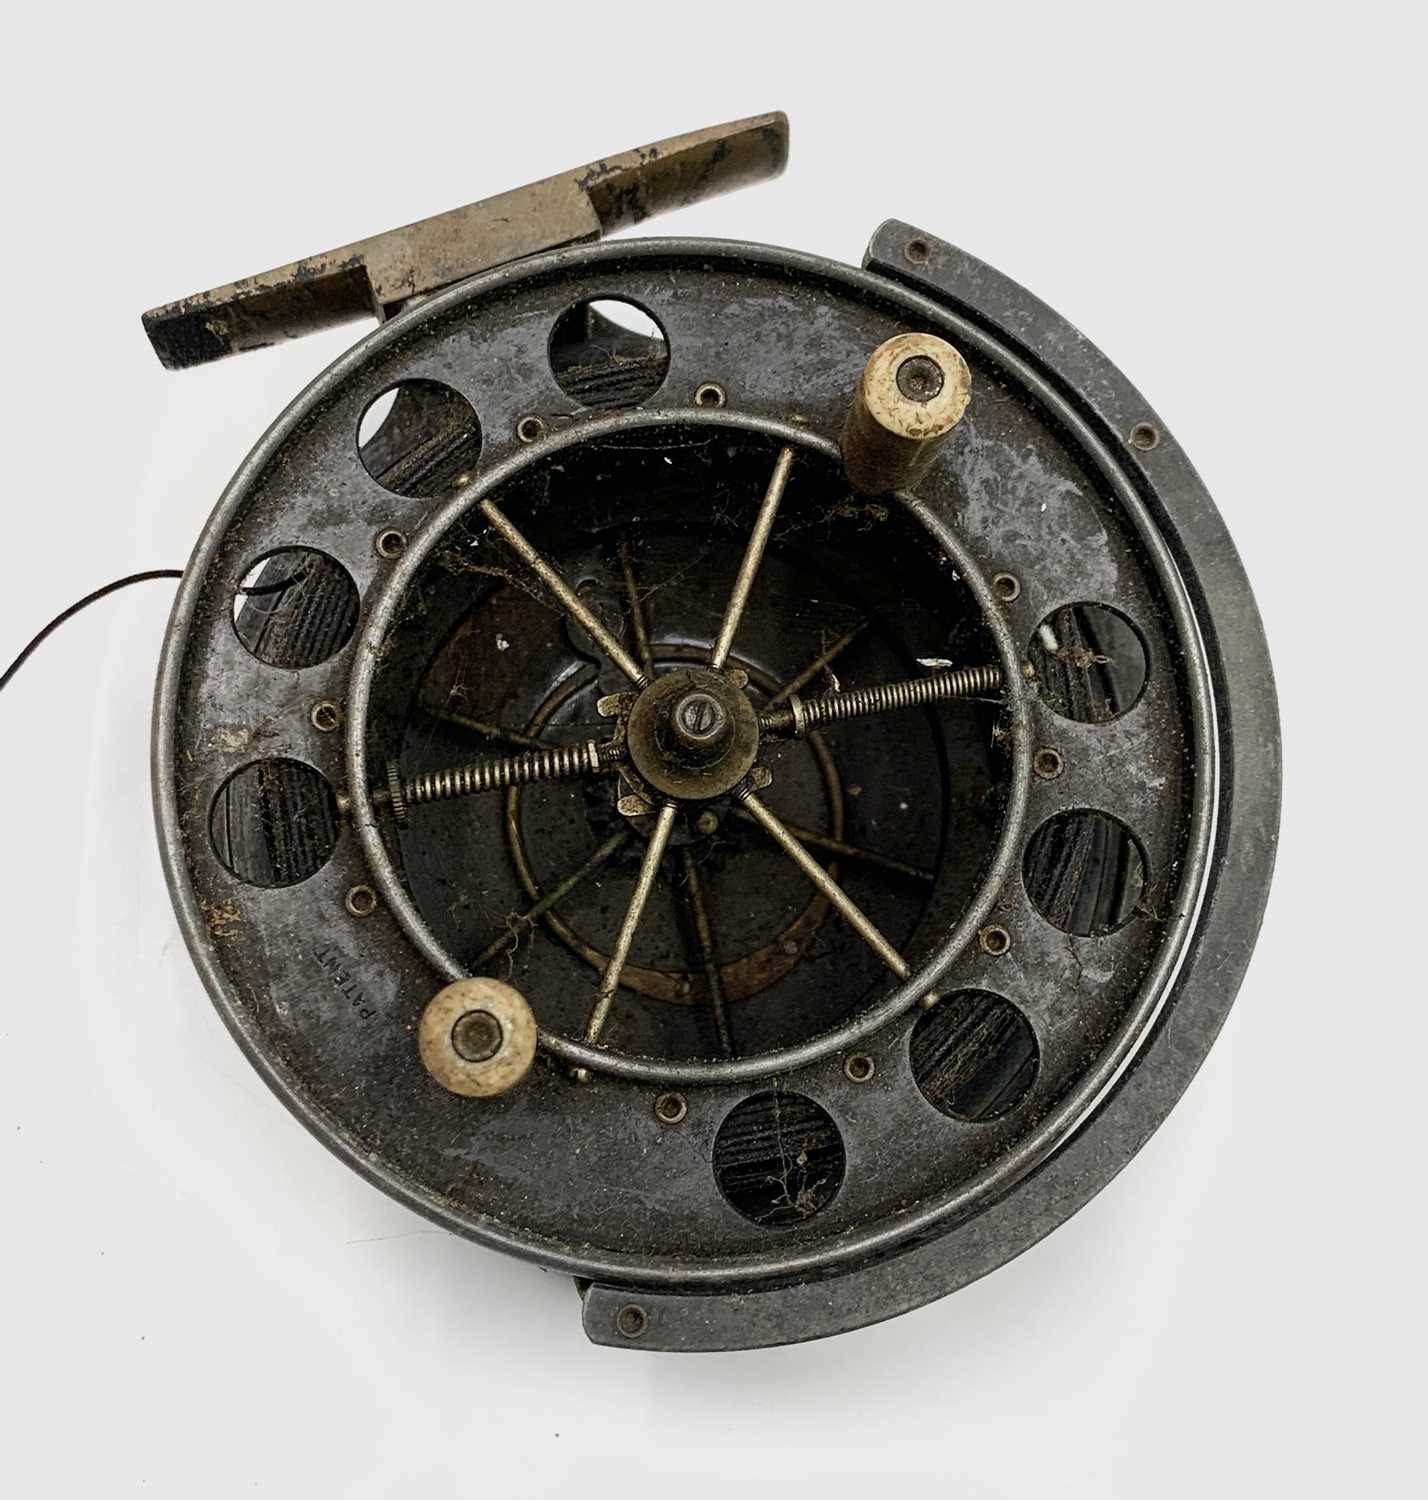 An Allcock & Co centre pin Aerial fishing reel, with ivorine handles and brass foot, diameter